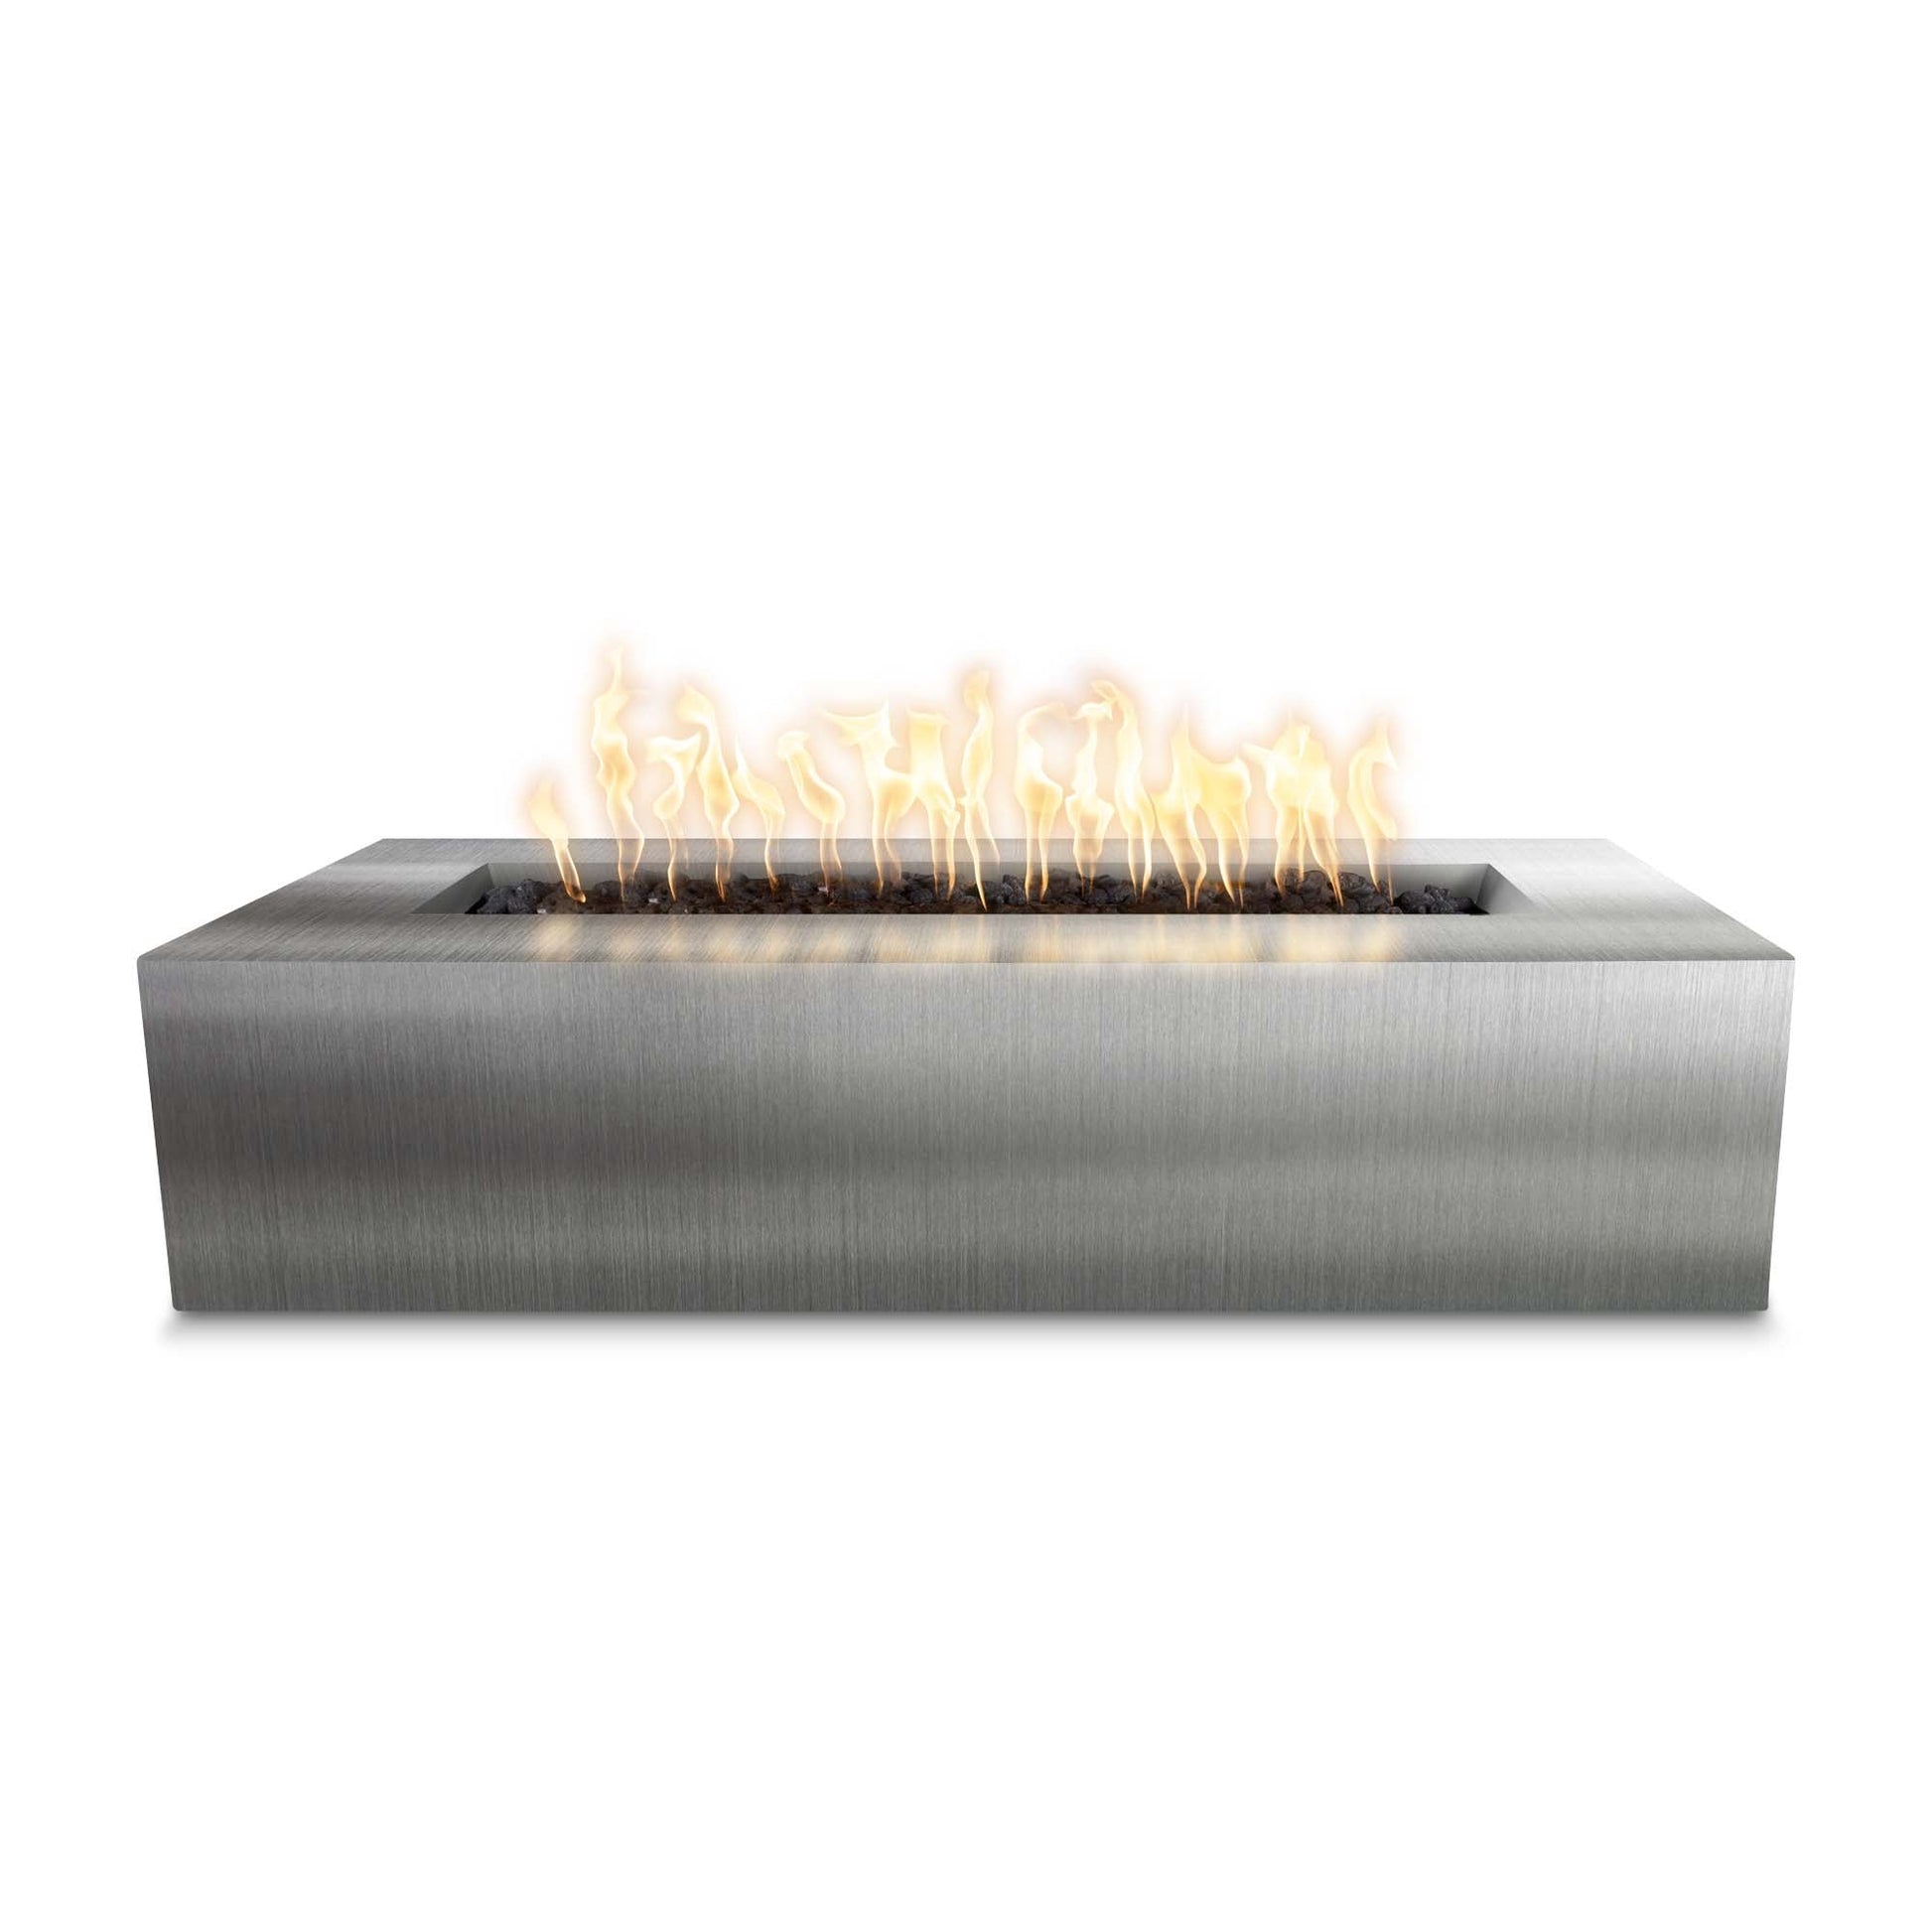 The Outdoor Plus Rectangular Regal 54" Hammered Copper Natural Gas Fire Pit with Flame Sense with Spark Ignition